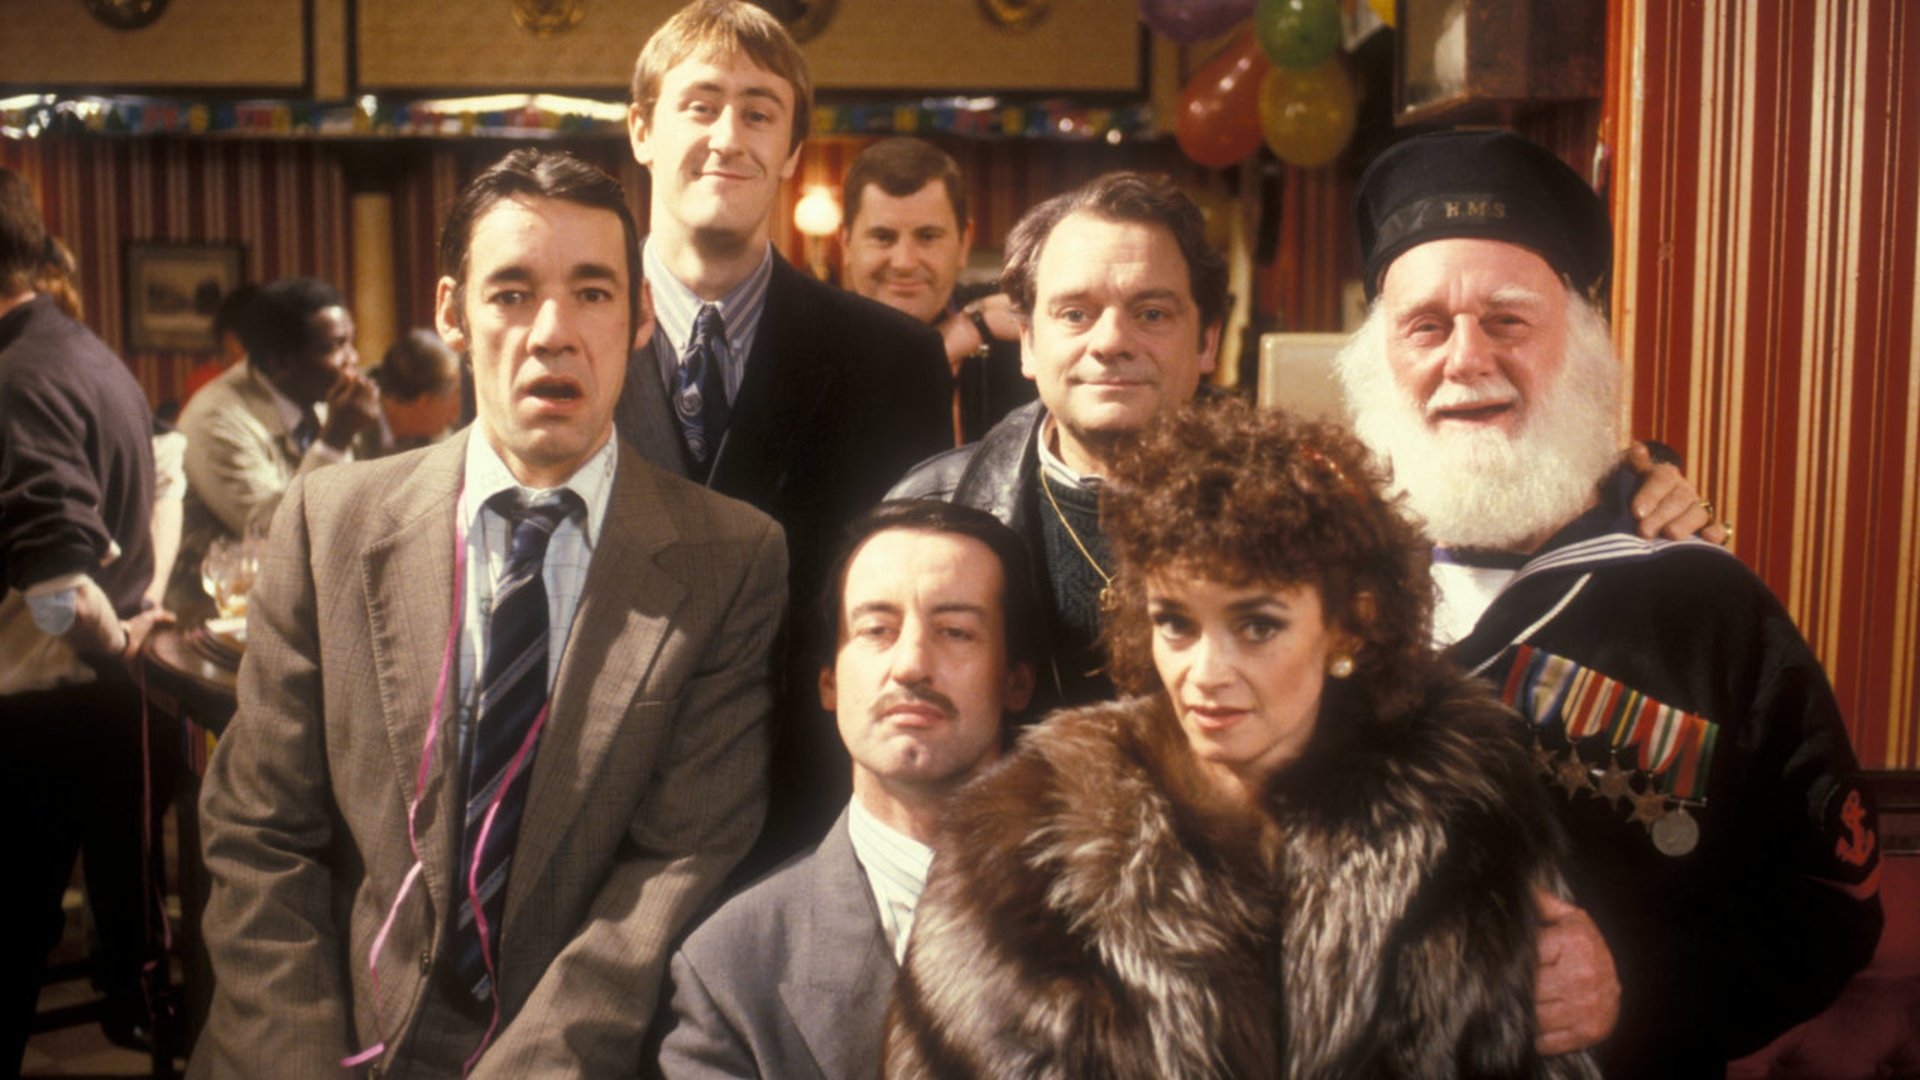 Watch Only Fools and Horses: Dates Season 1 Episode 1 Online - Stream Full Episodes - Only Fools And Horses Season 7 Episode 1